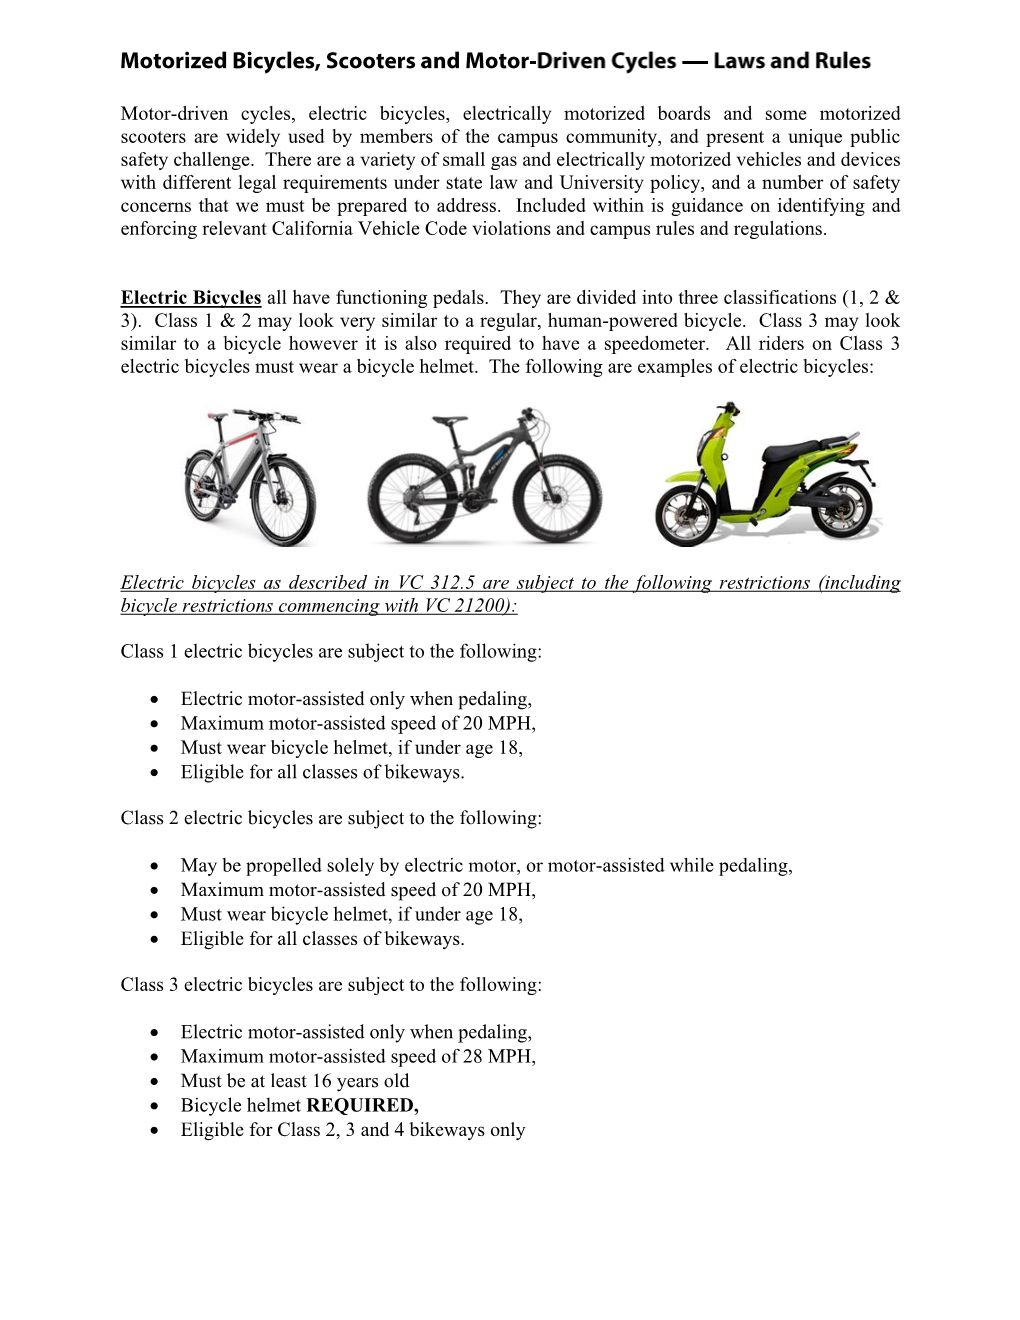 Motorized Bicycles, Scooters, and Motor-Driven Cycles